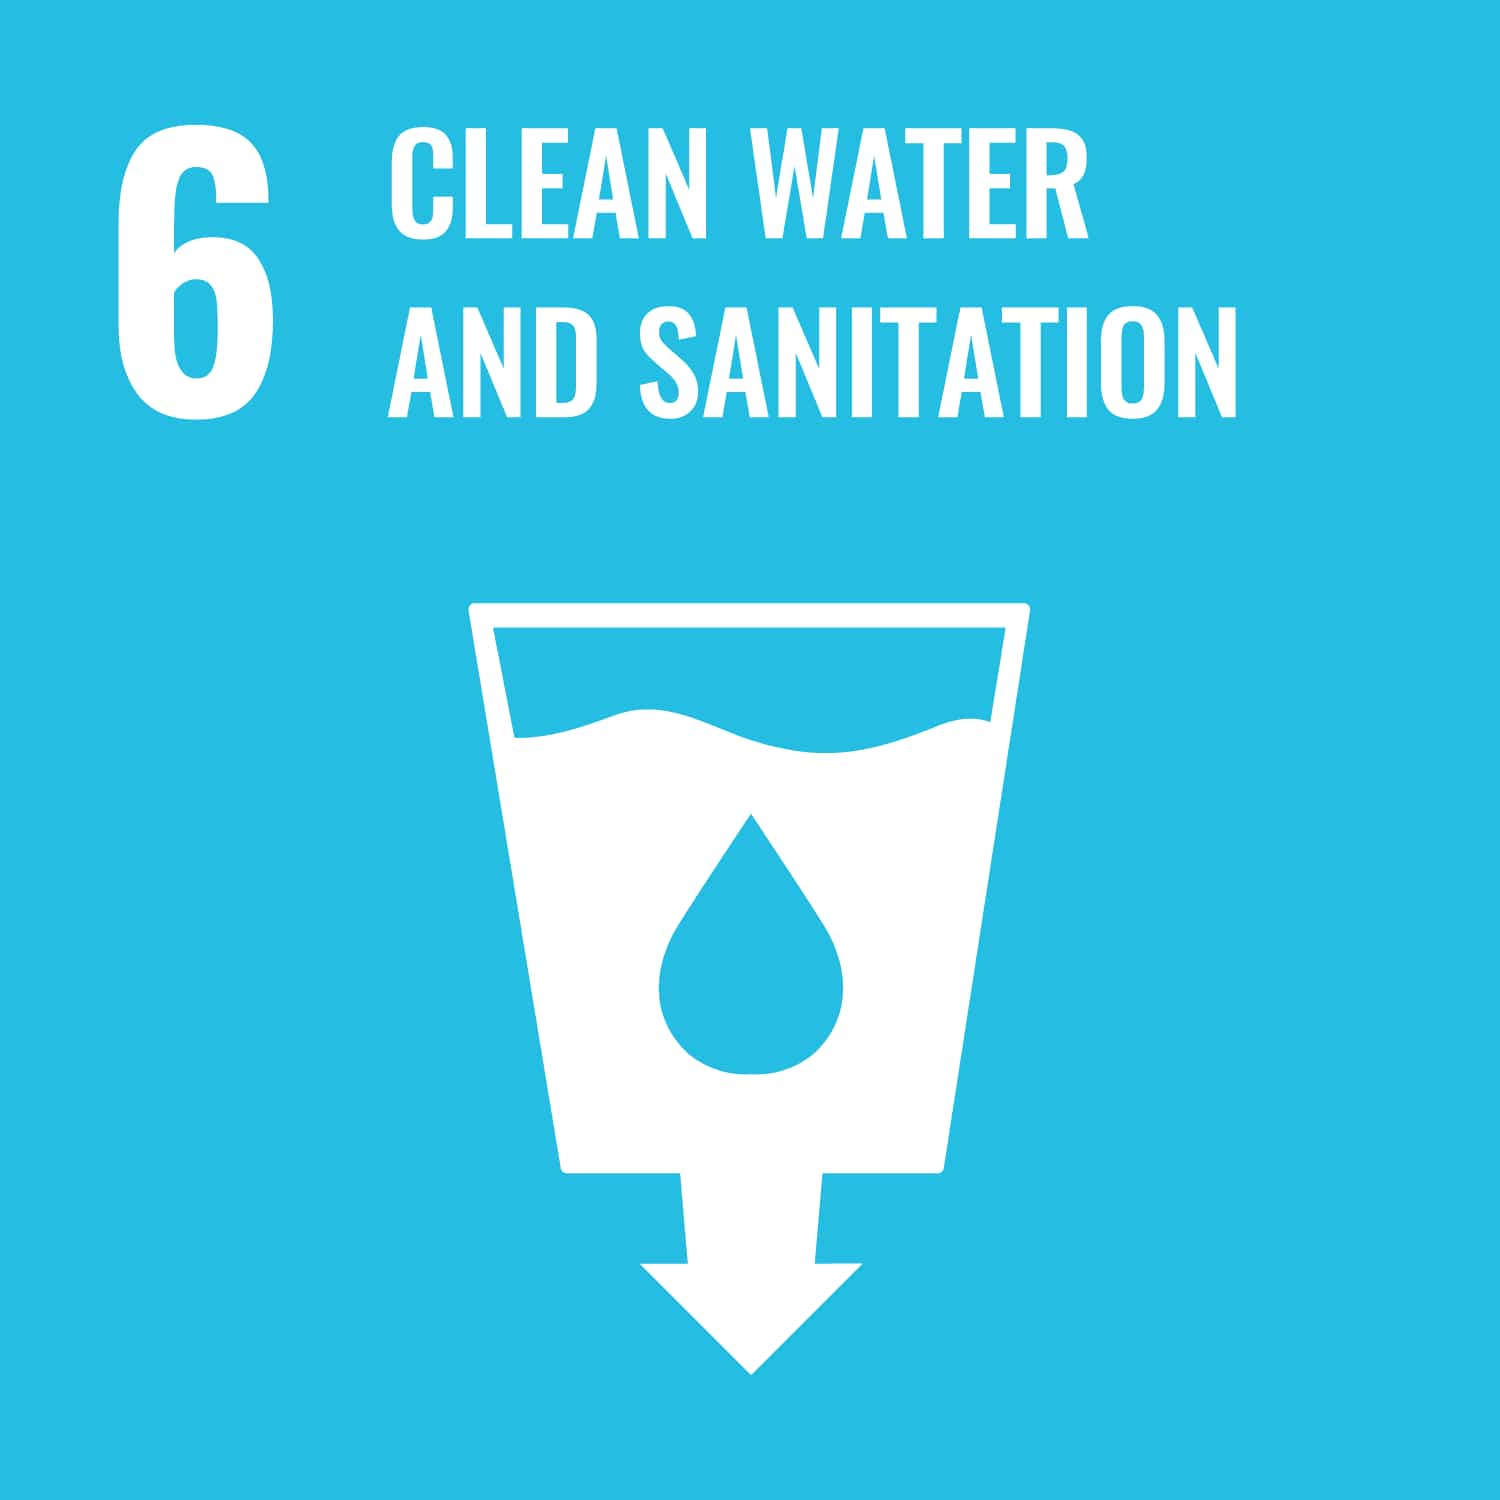 The logo for United Nations Sustainable Development Goal (SDG) 6: Clean Water and Sanitation